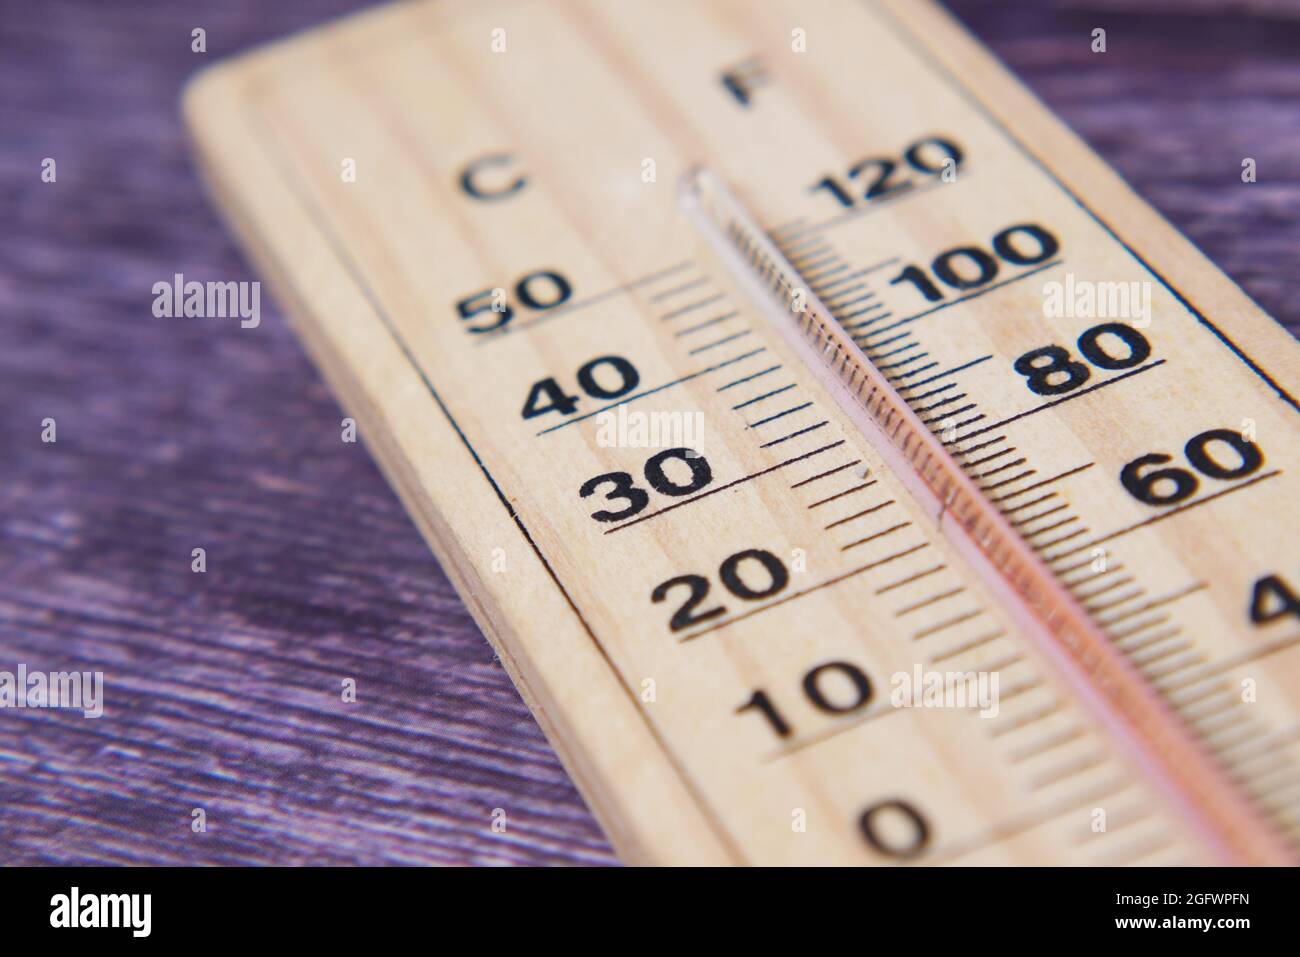 Close up of Temperature measurement tools on table. Stock Photo